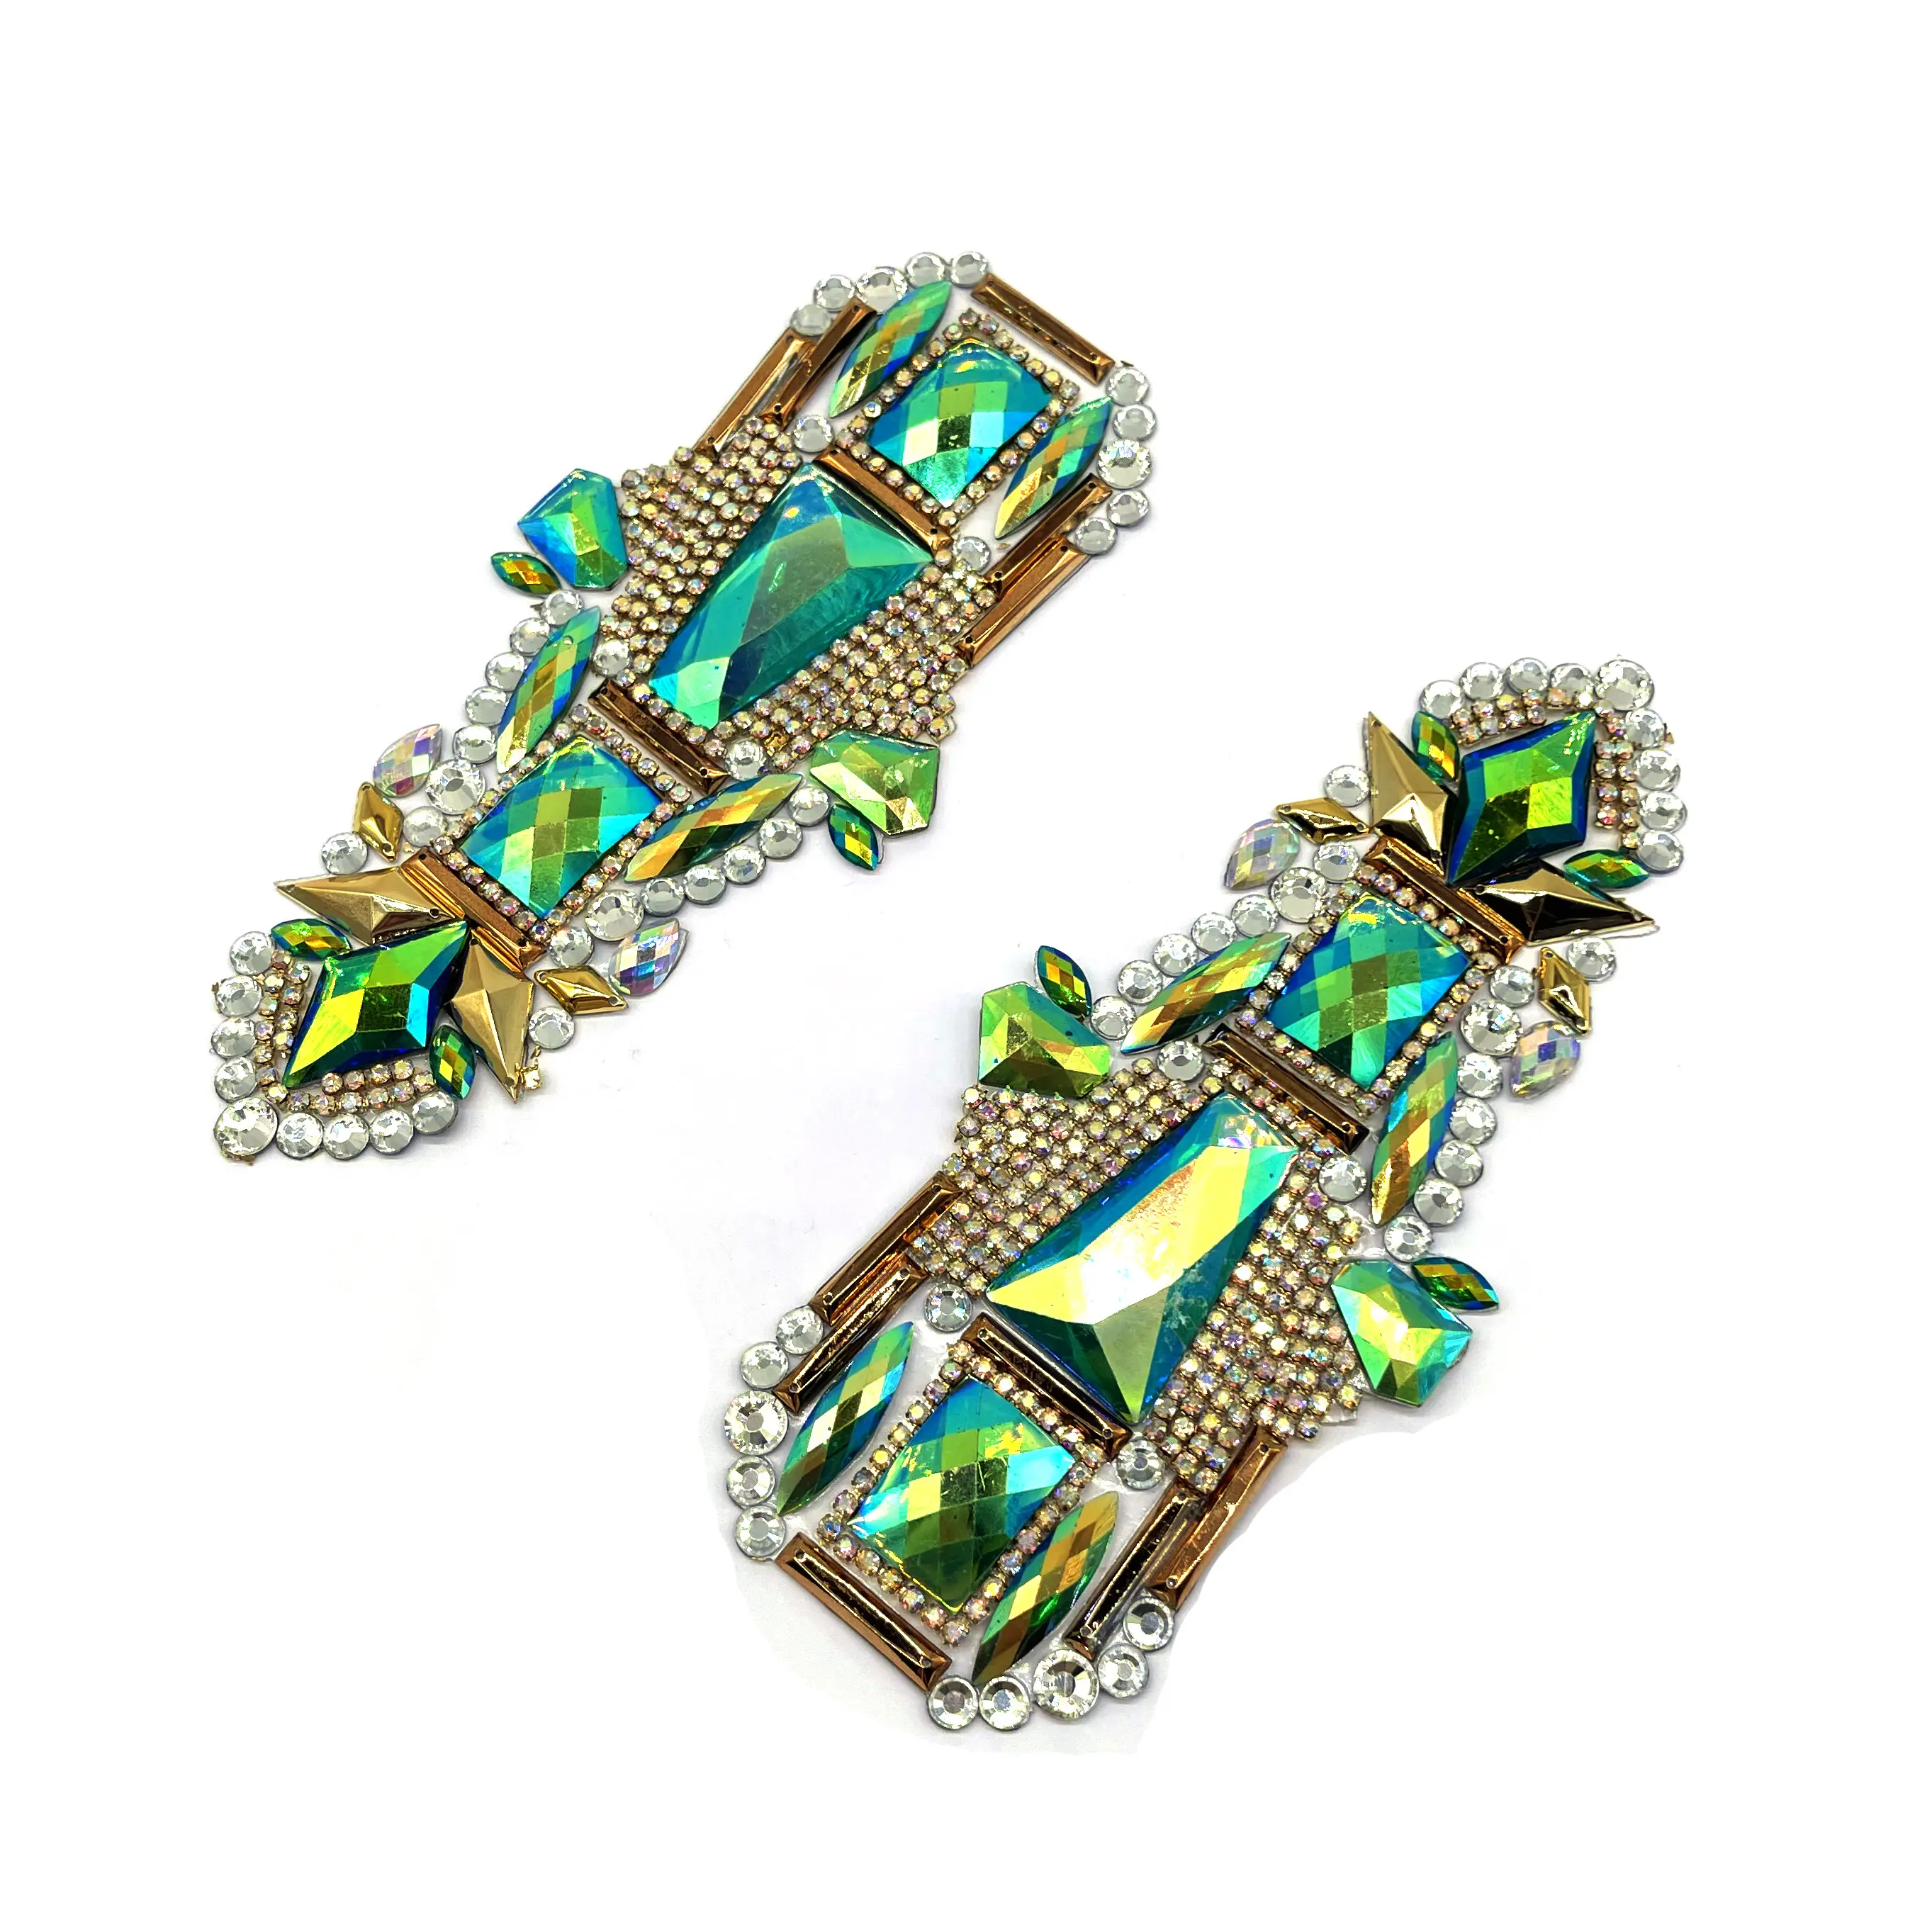 Carnival Resin Hot-Fix Rhinestone Appliques Flatback Iron-On Patches mardi gras apparel for women